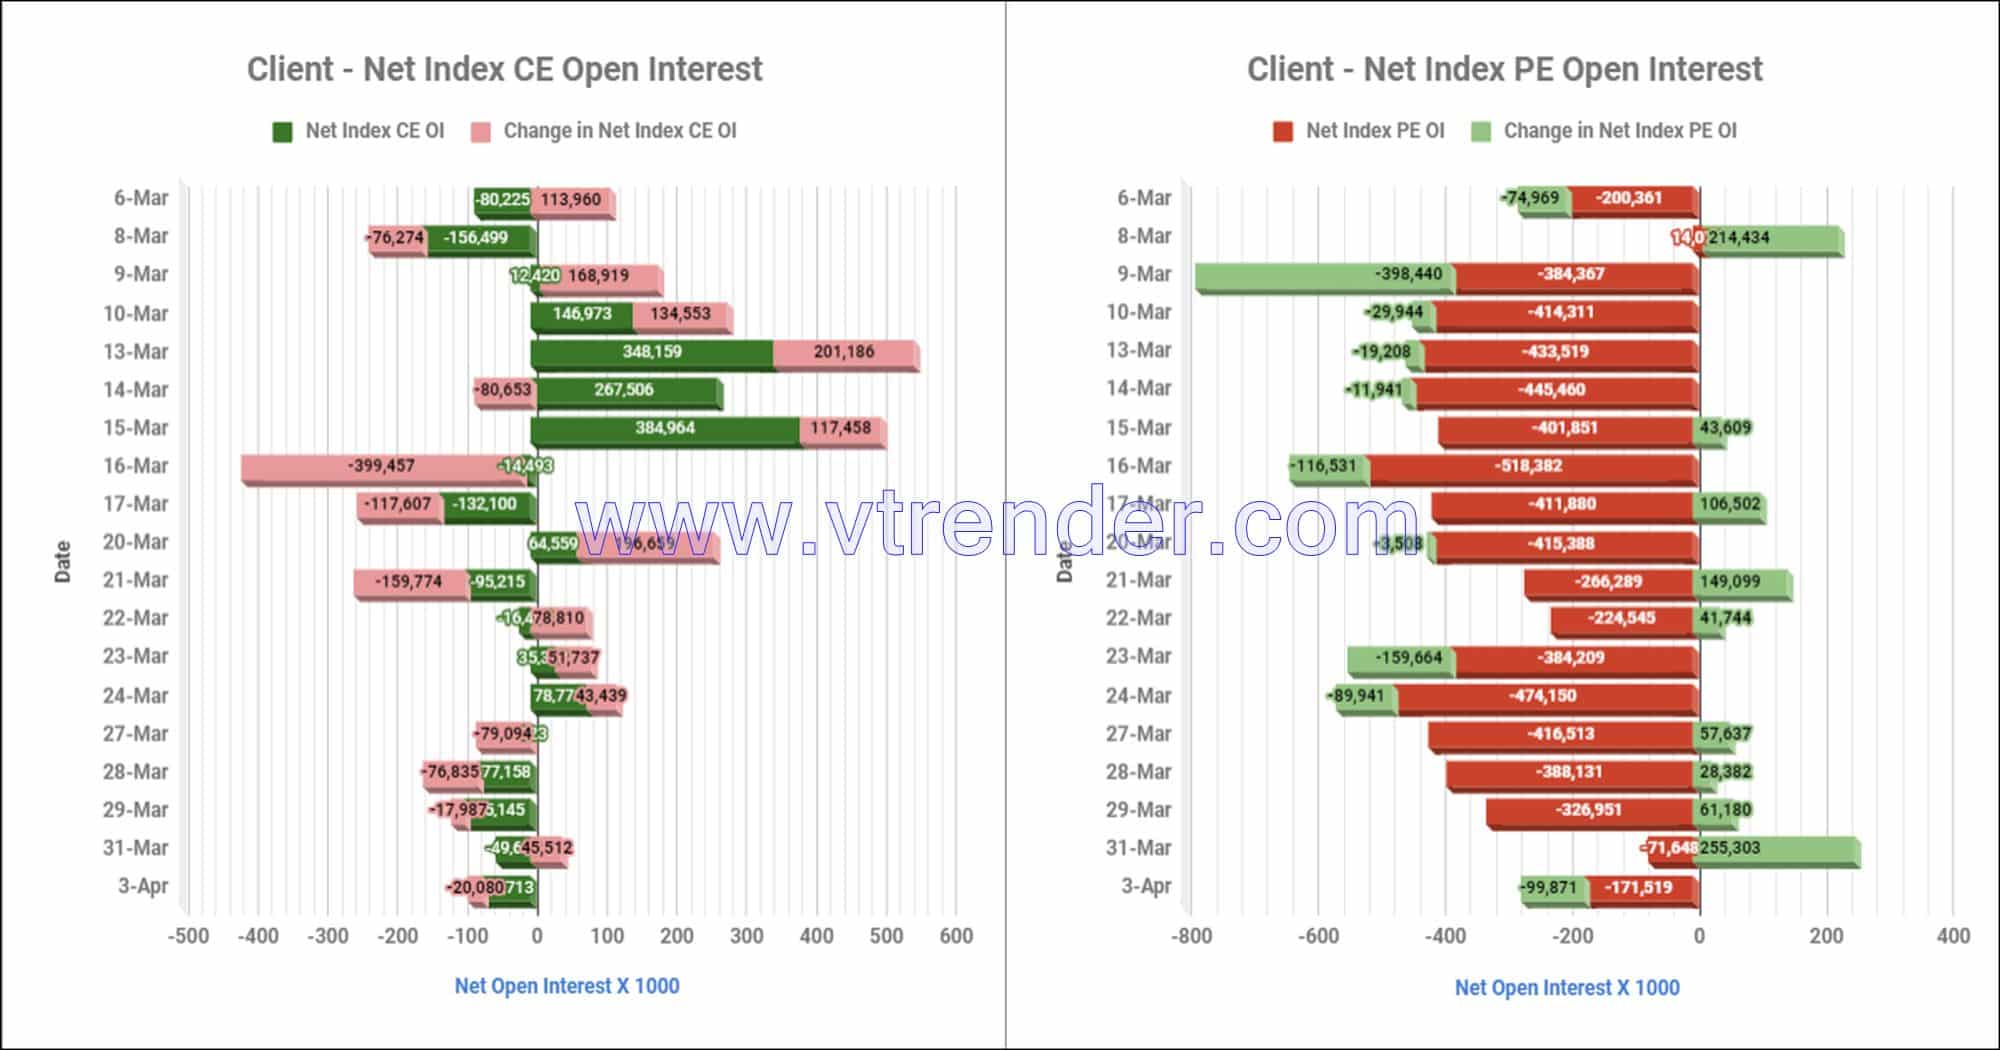 Clientinop03Apr Participantwise Net Open Interest And Net Equity Investments – 3Rd Apr 2023 Client, Equity, Fii, Index Futures, Index Options, Open Interest, Prop